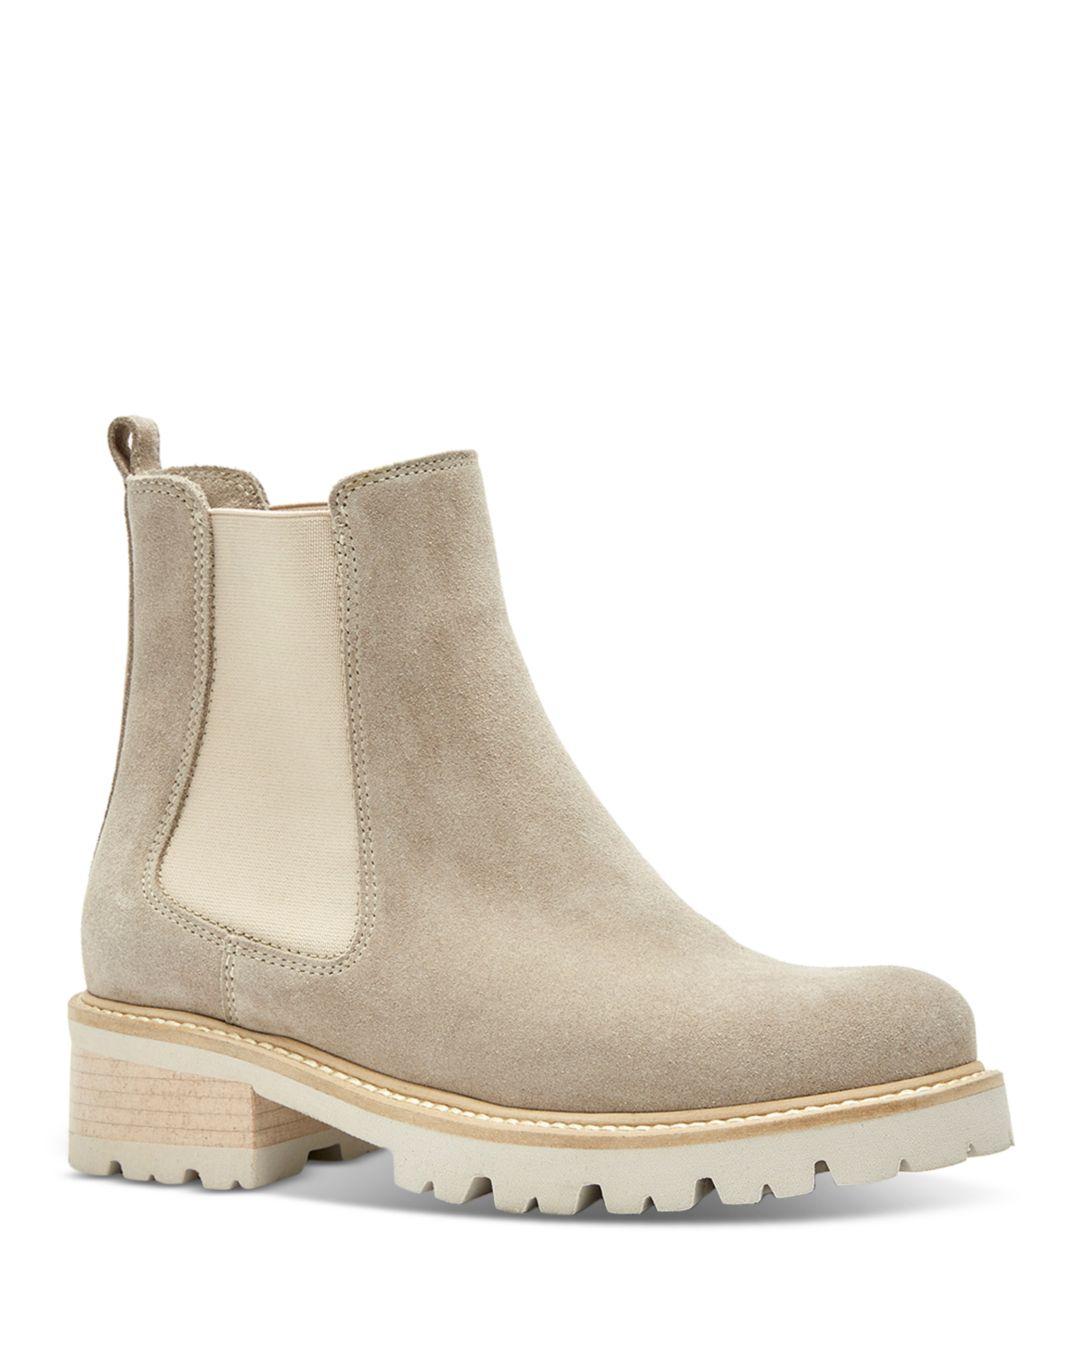 La Canadienne Carla Pull On Lug Sole Chelsea Boots in Natural | Lyst